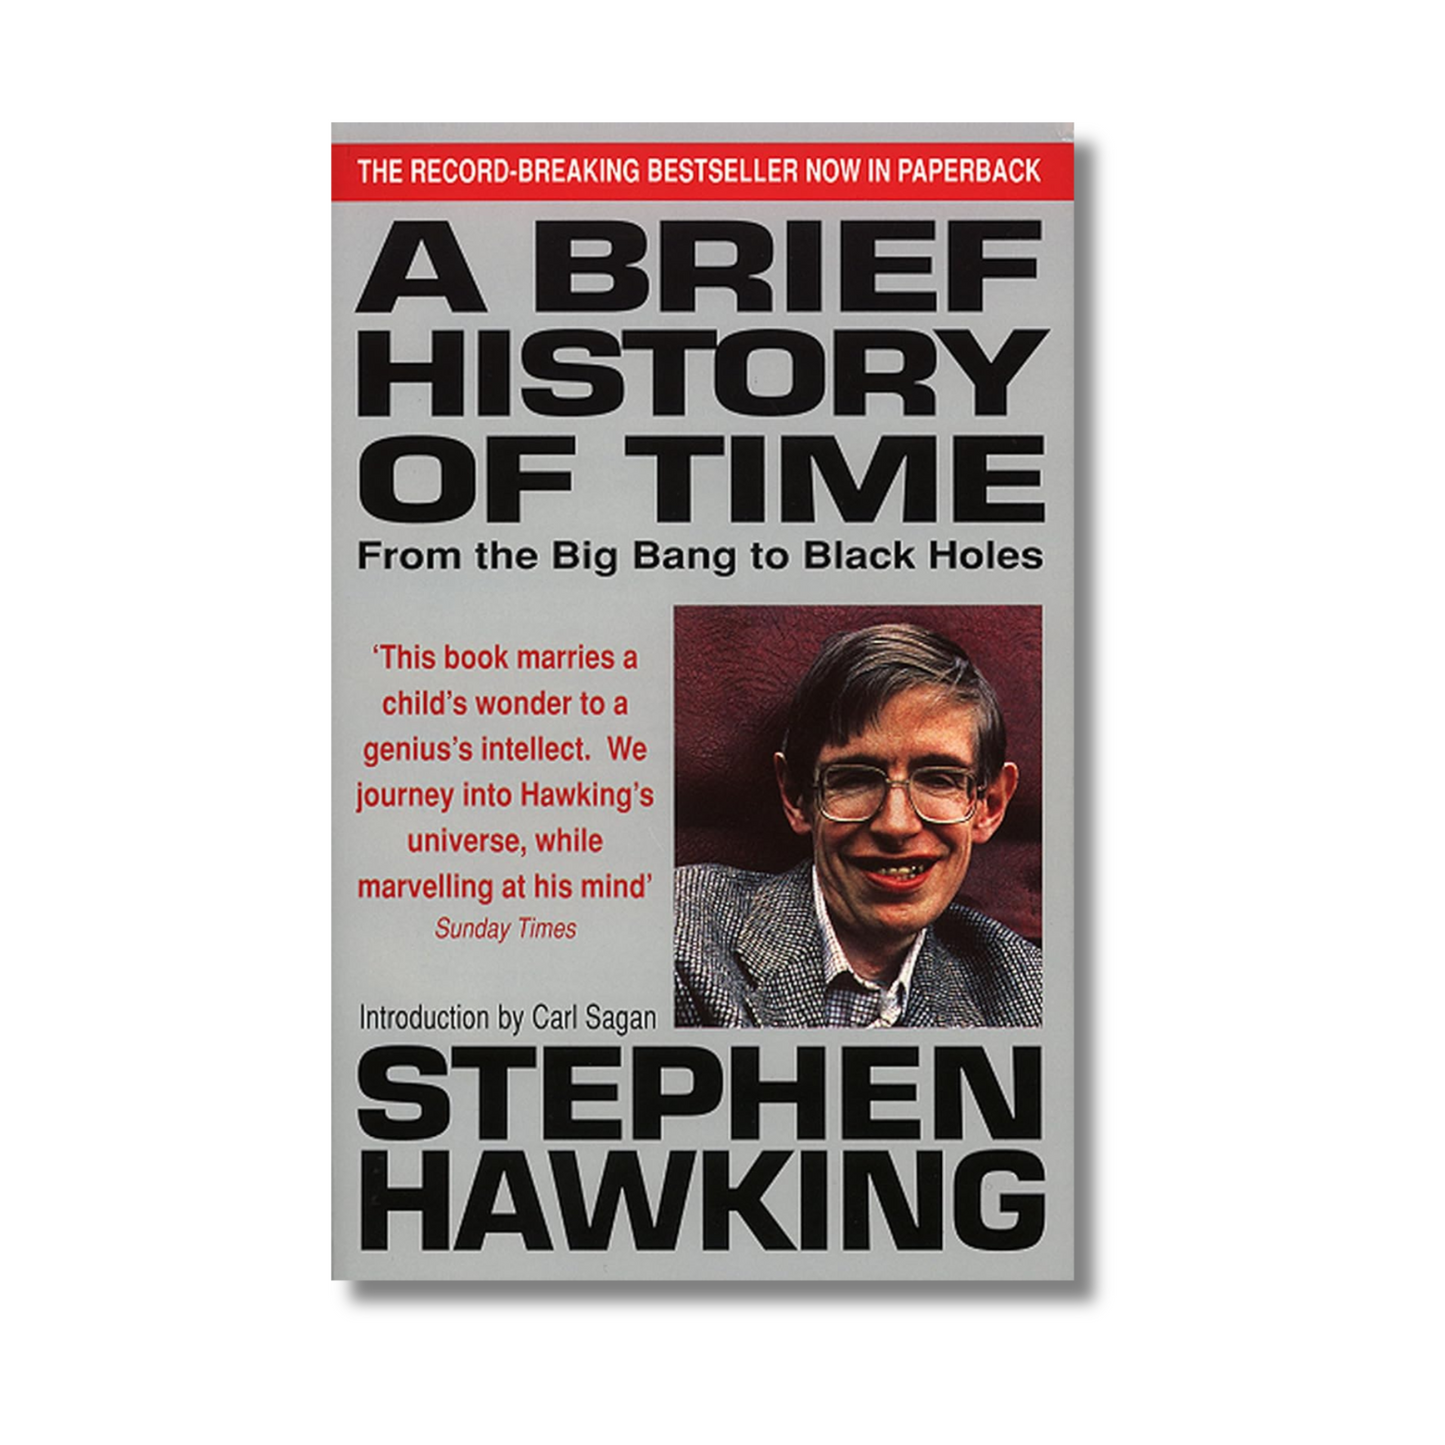 A Brief History Of Time By Stephen Hawking (Paperback)